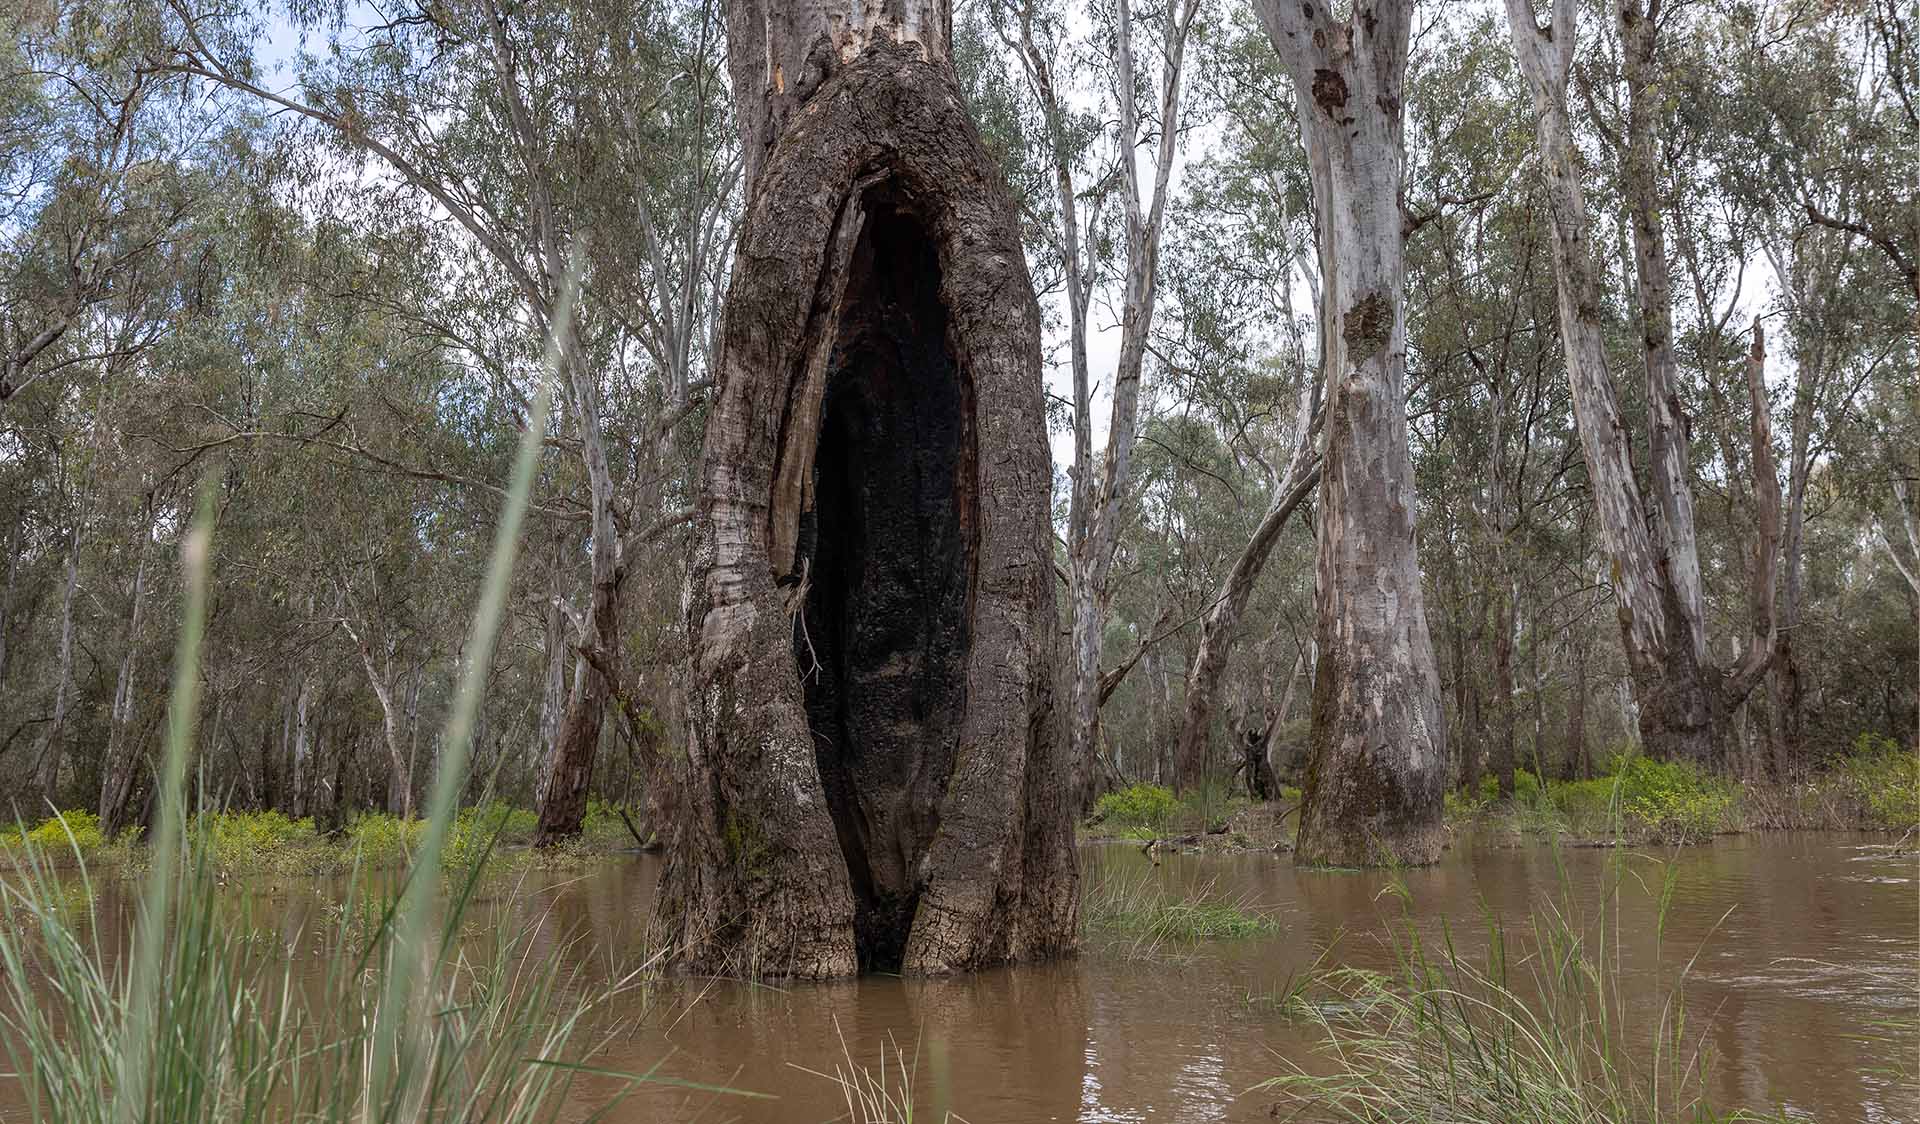 A flooded river. A tree with a large oblong carving removed from the trunk. 